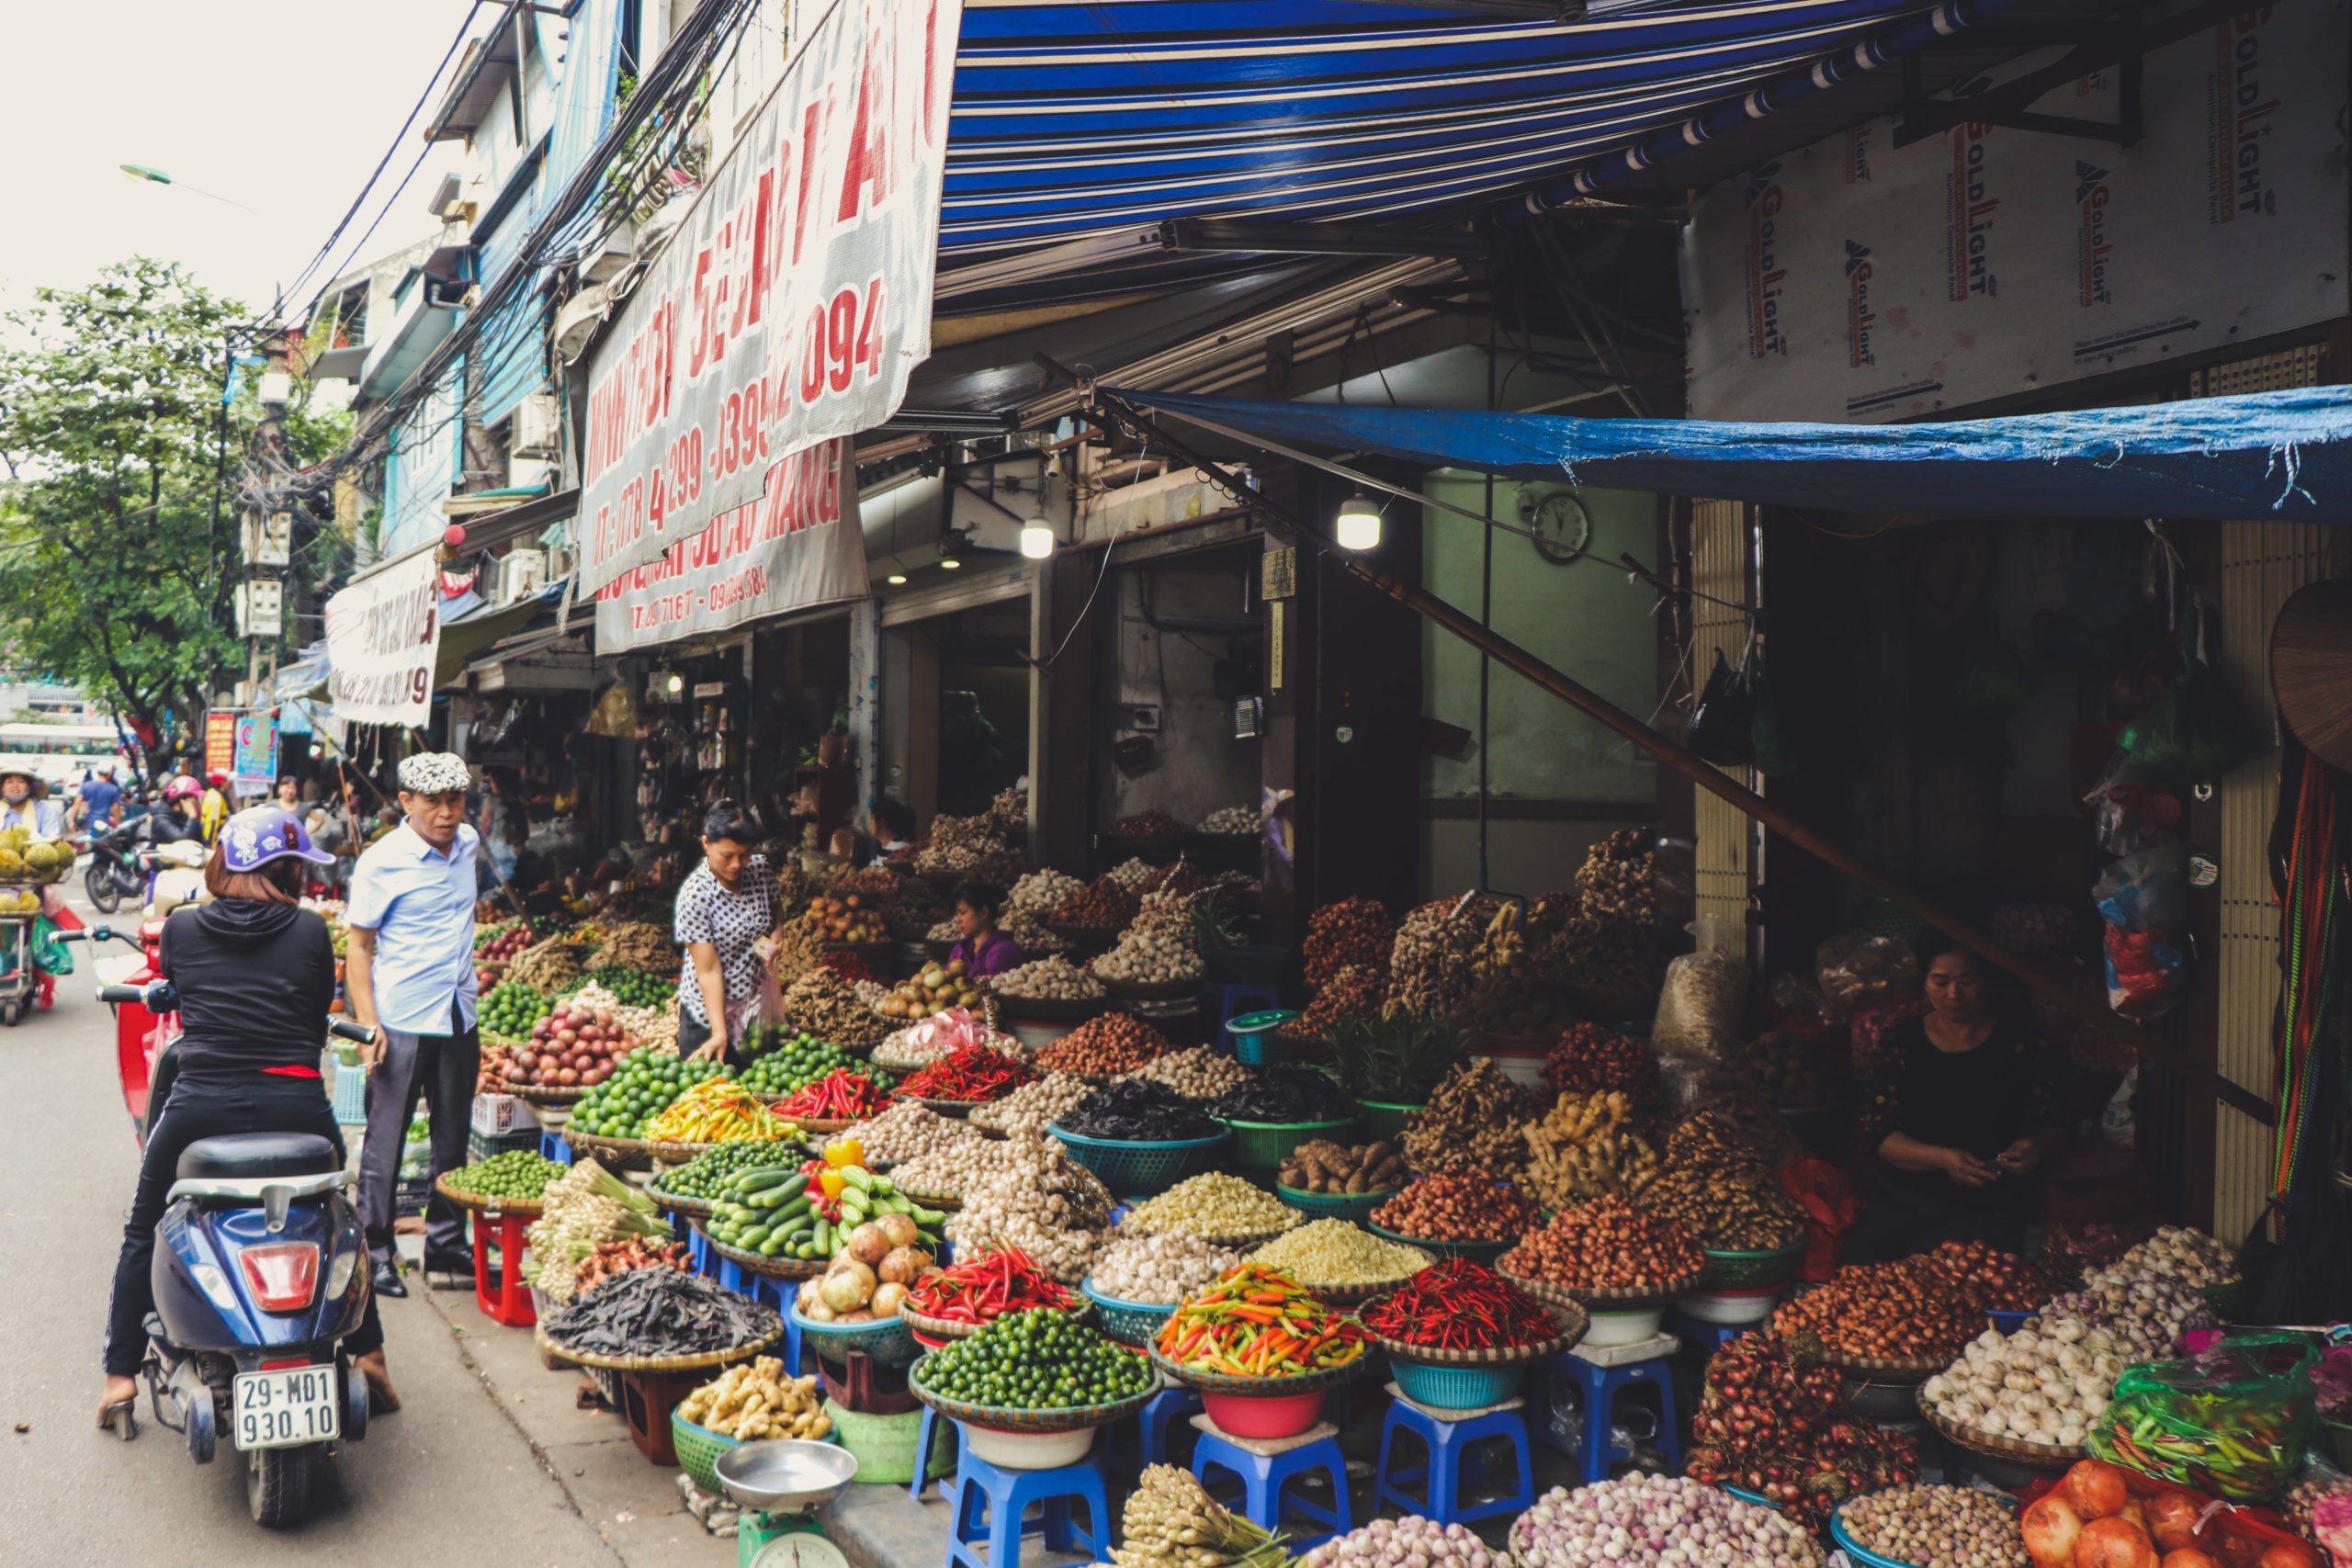 city street in Vietnam with spices and other foods